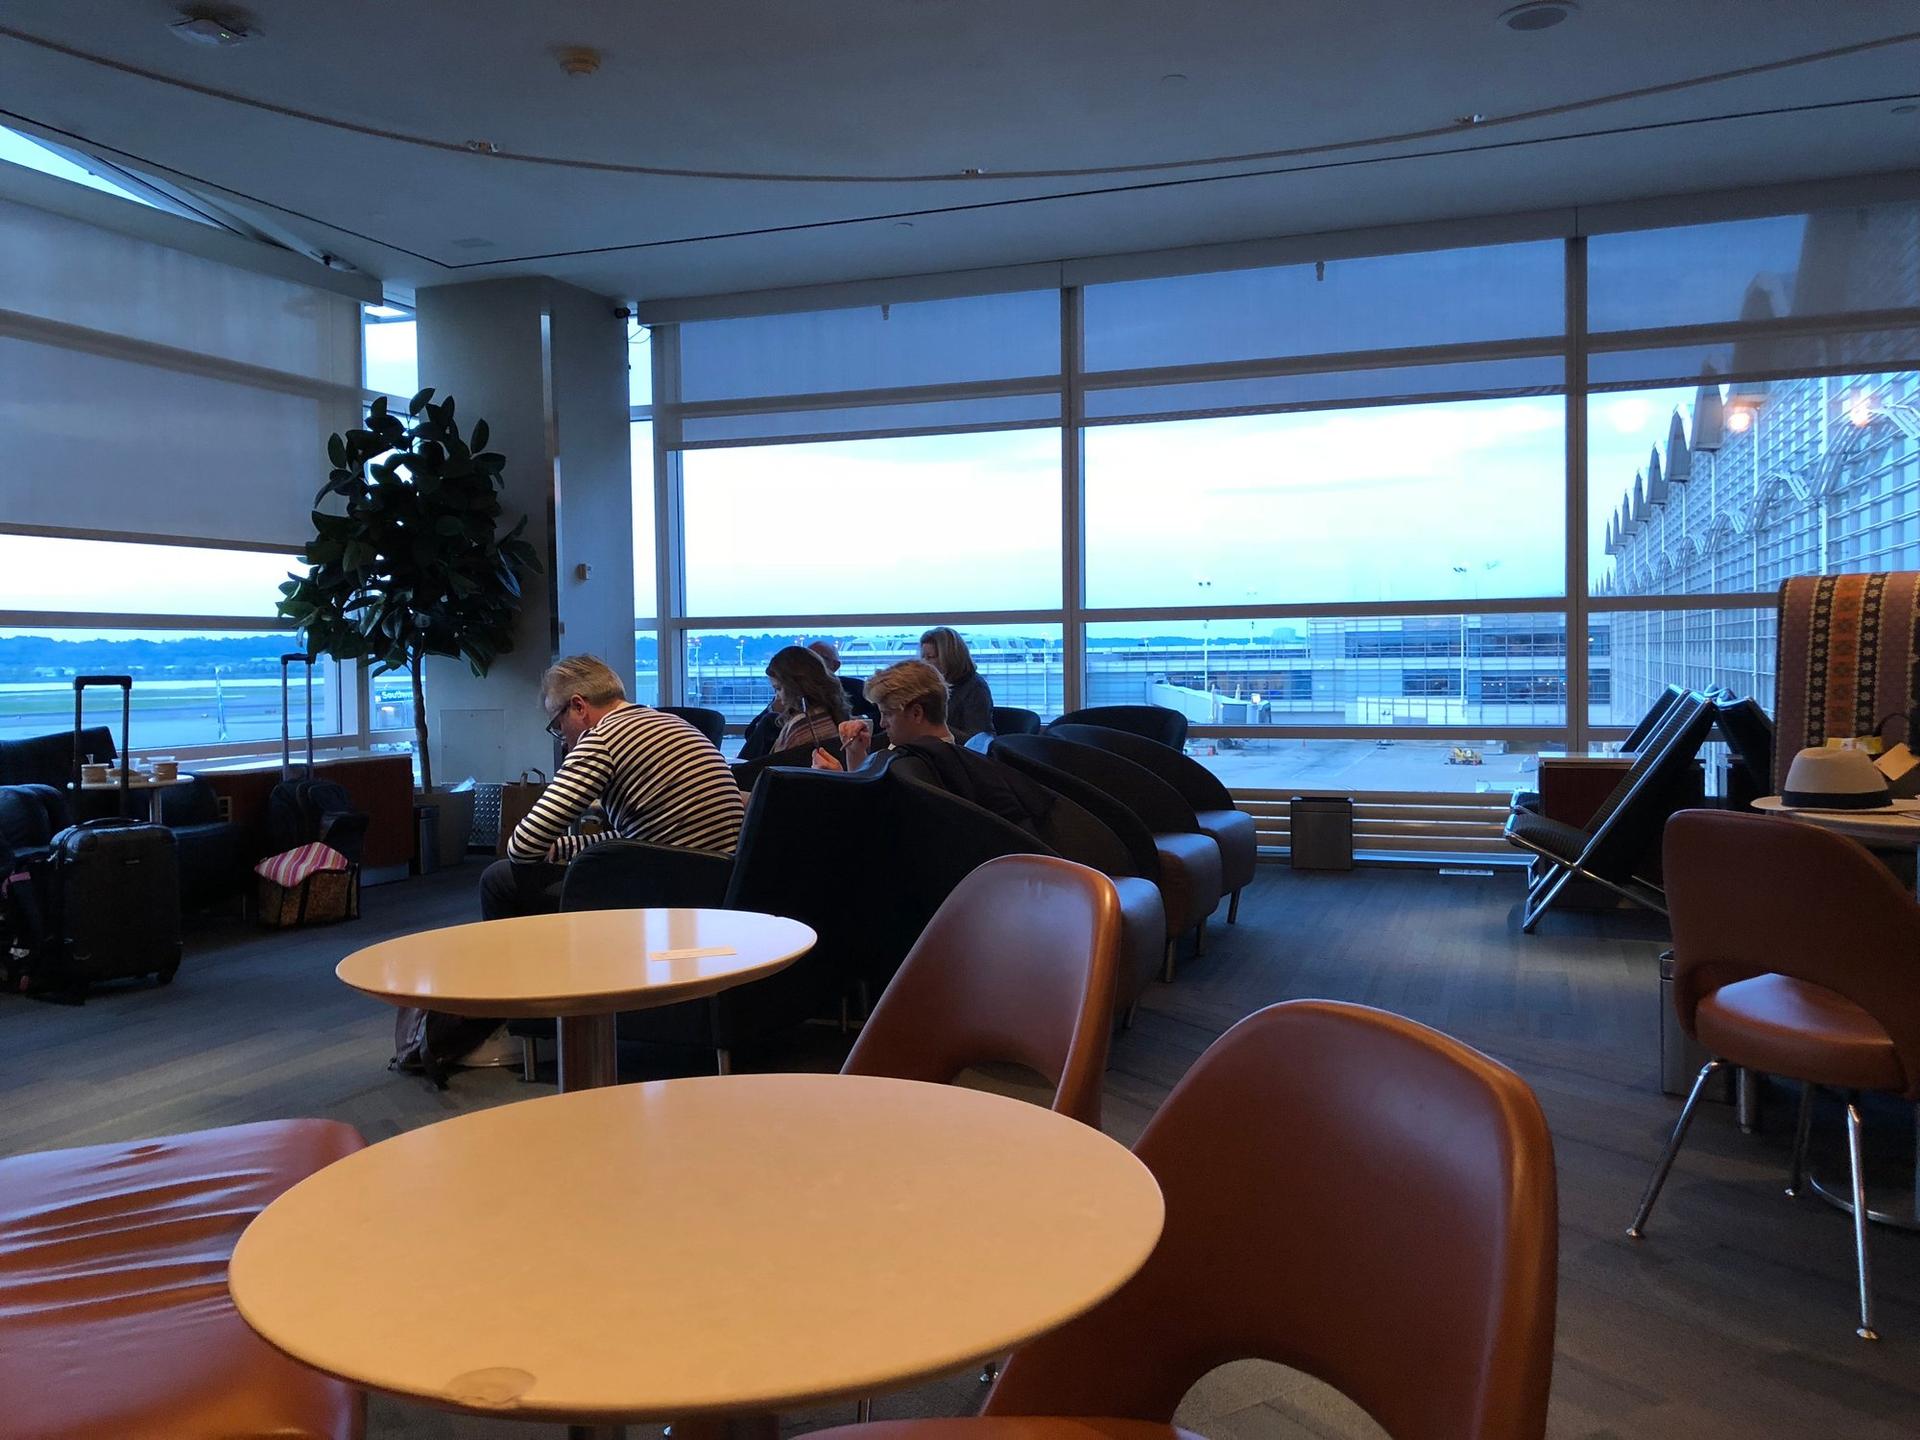 American Airlines Admirals Club image 14 of 22